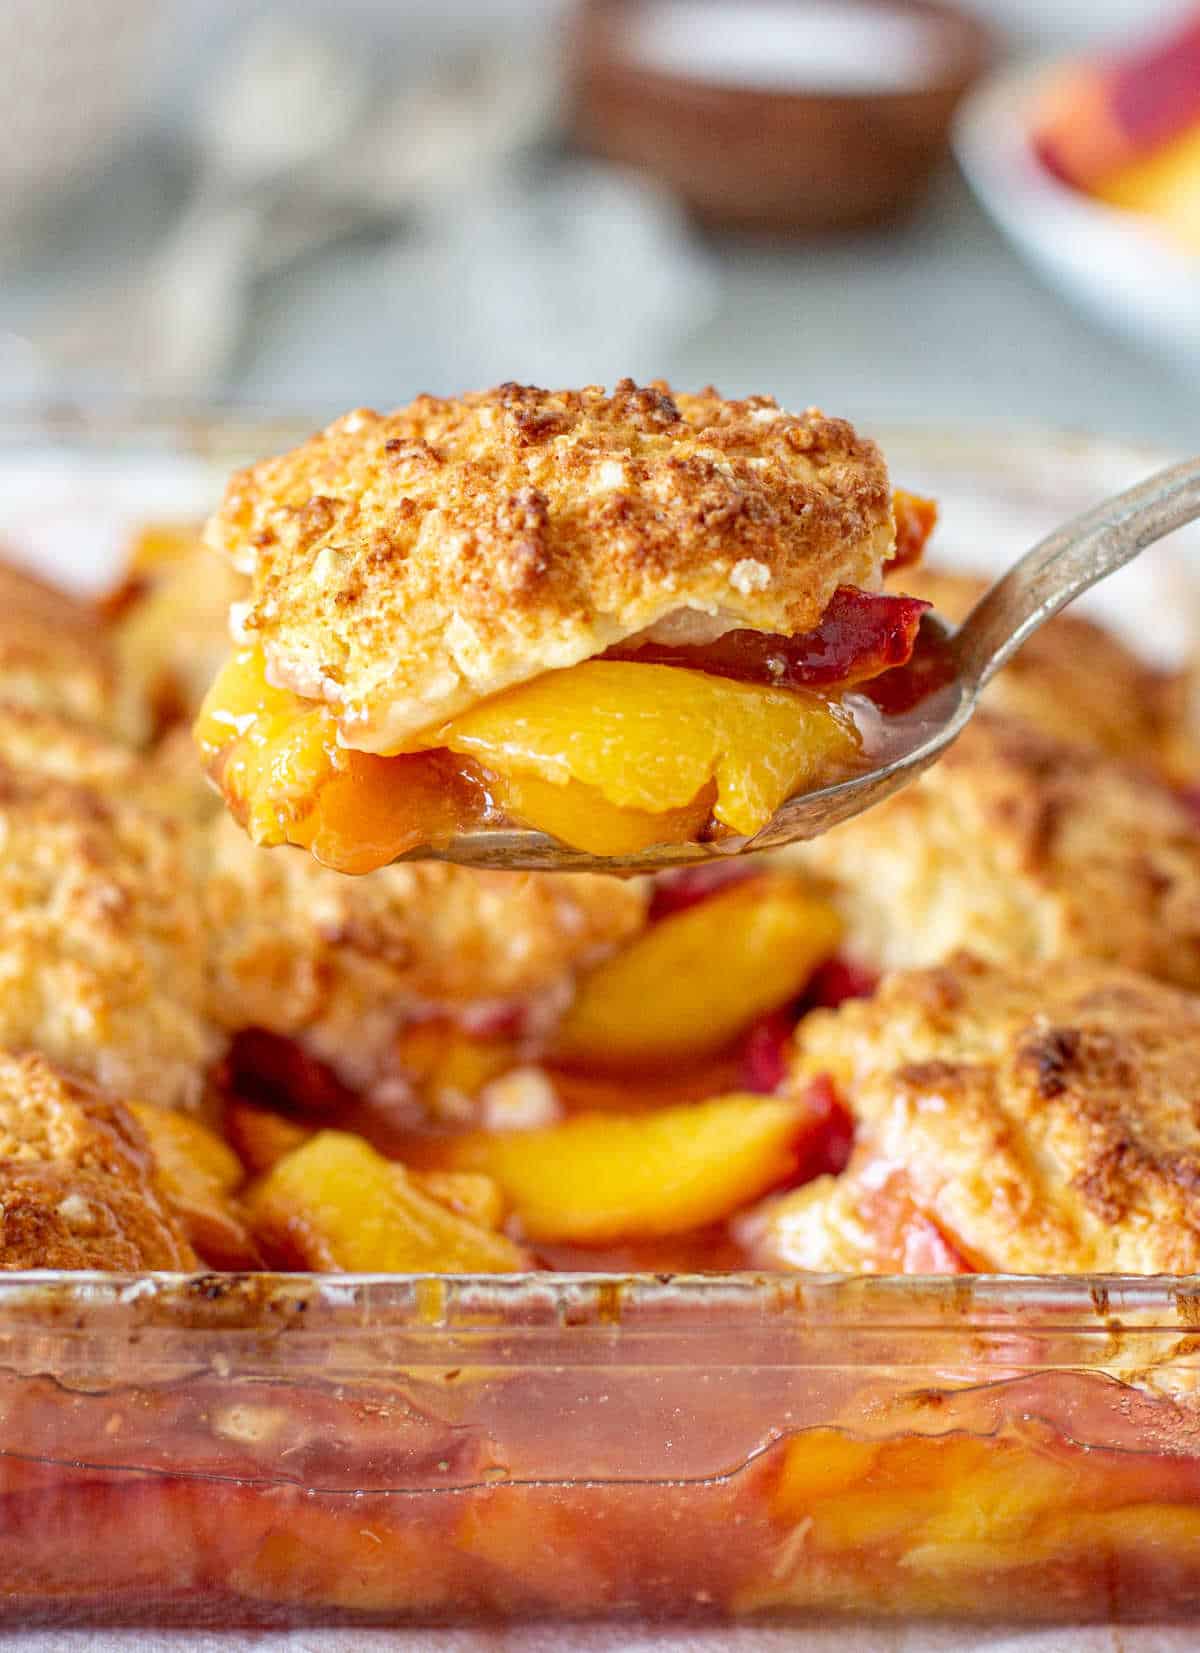 Lifting portion of peach cobbler from glass dish with silver spoon